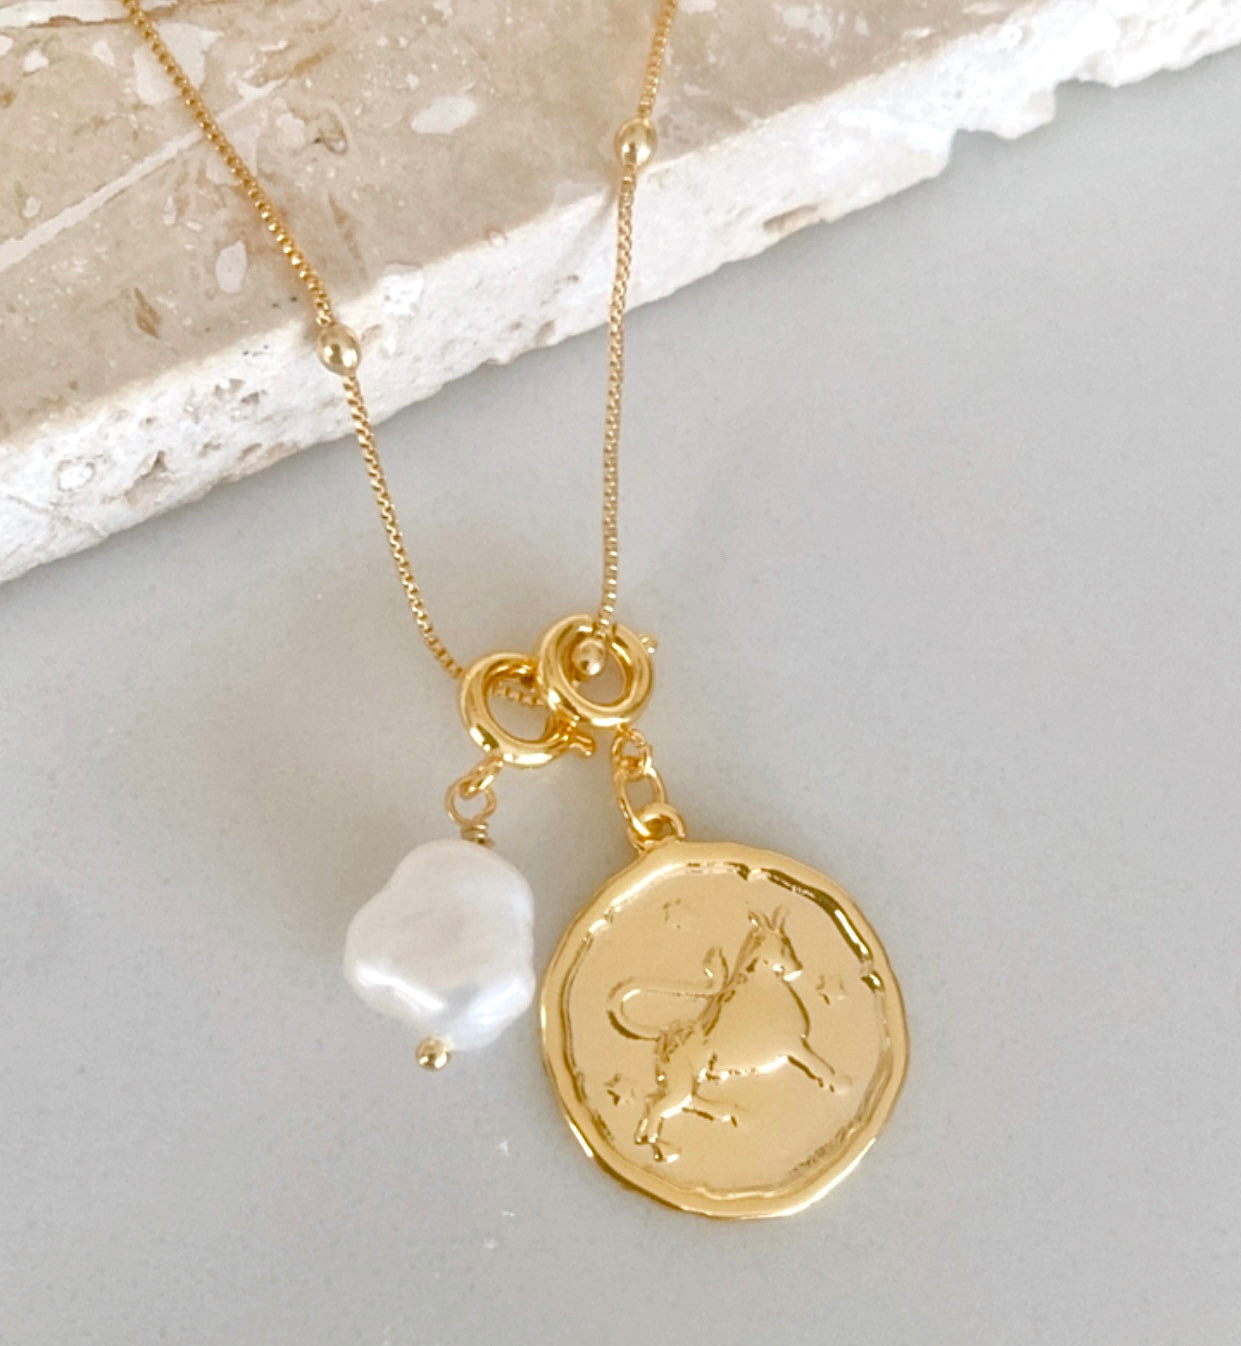 Zodiac with Freshwater Pearl - Taurus April 21 - May 20